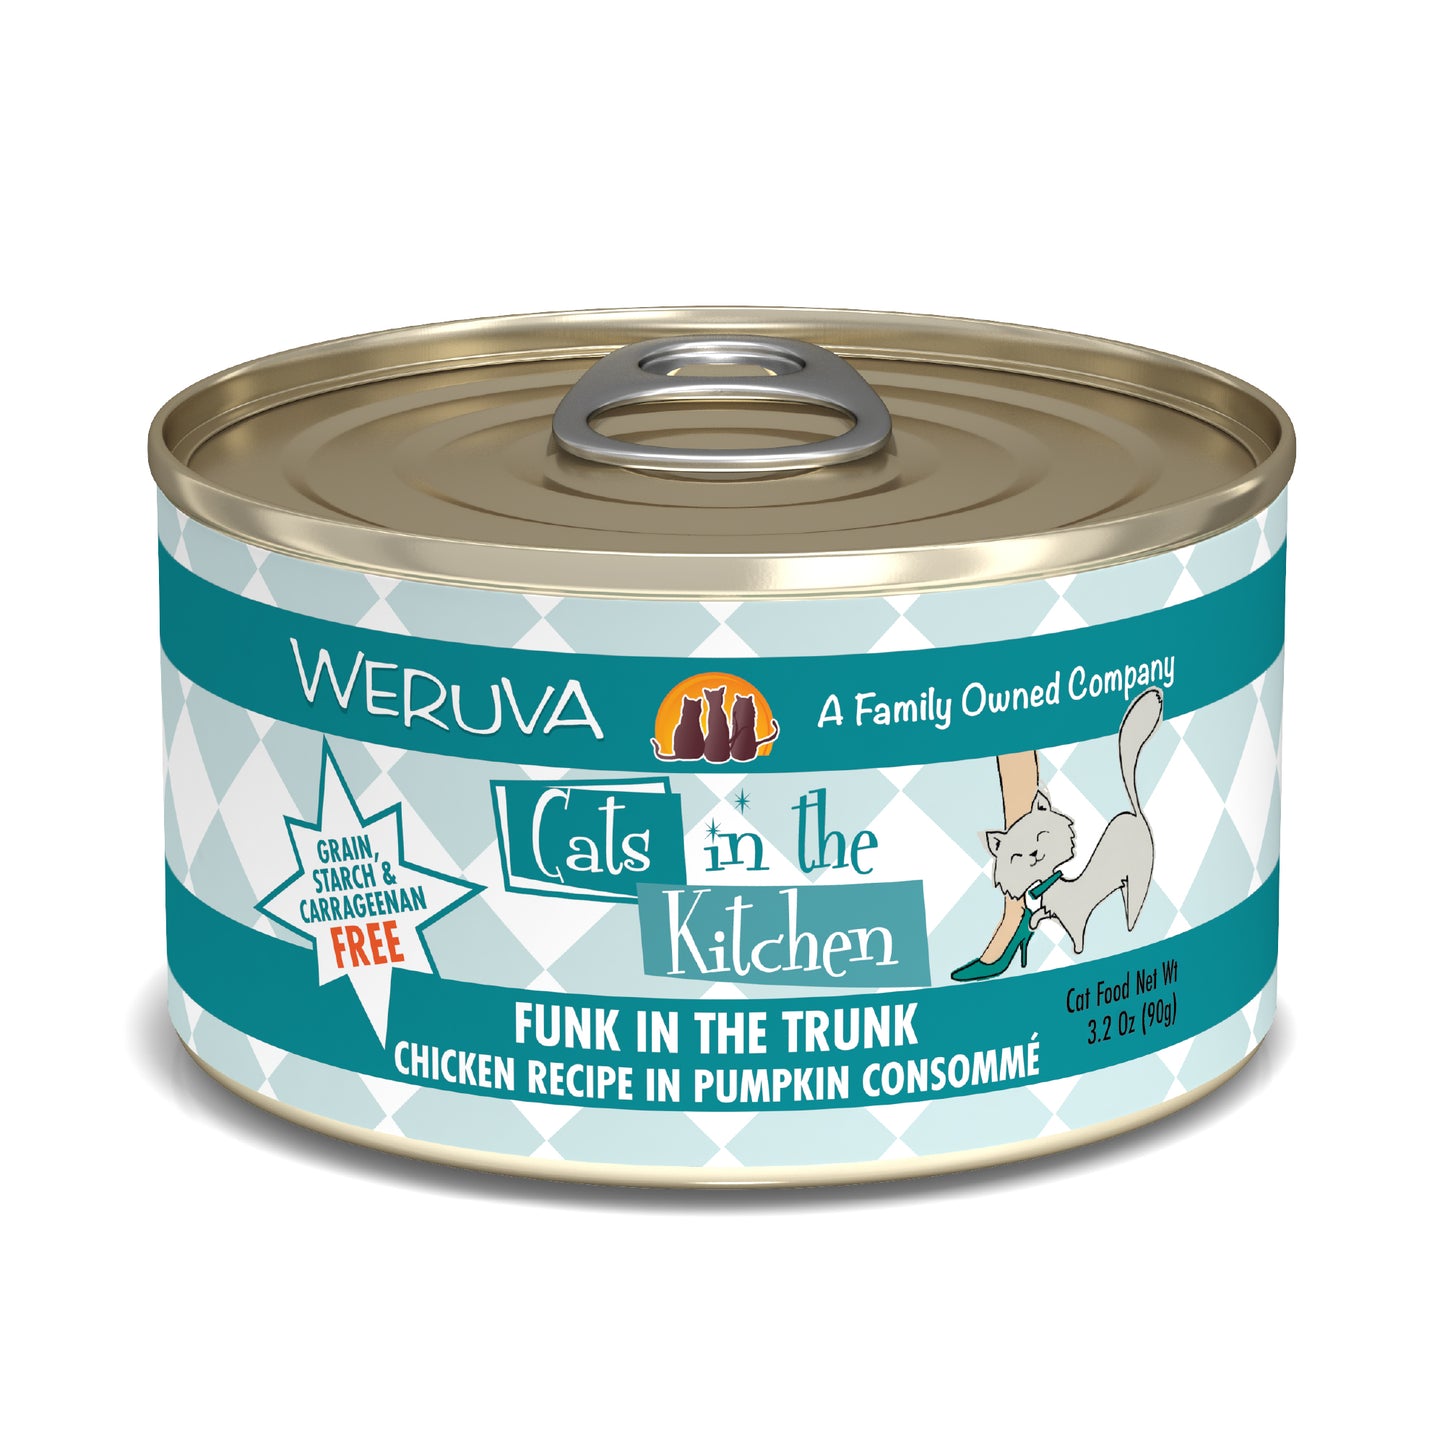 Weruva Cats in the Kitchen 3.2oz Canned Cat Food Funk in the Trunk